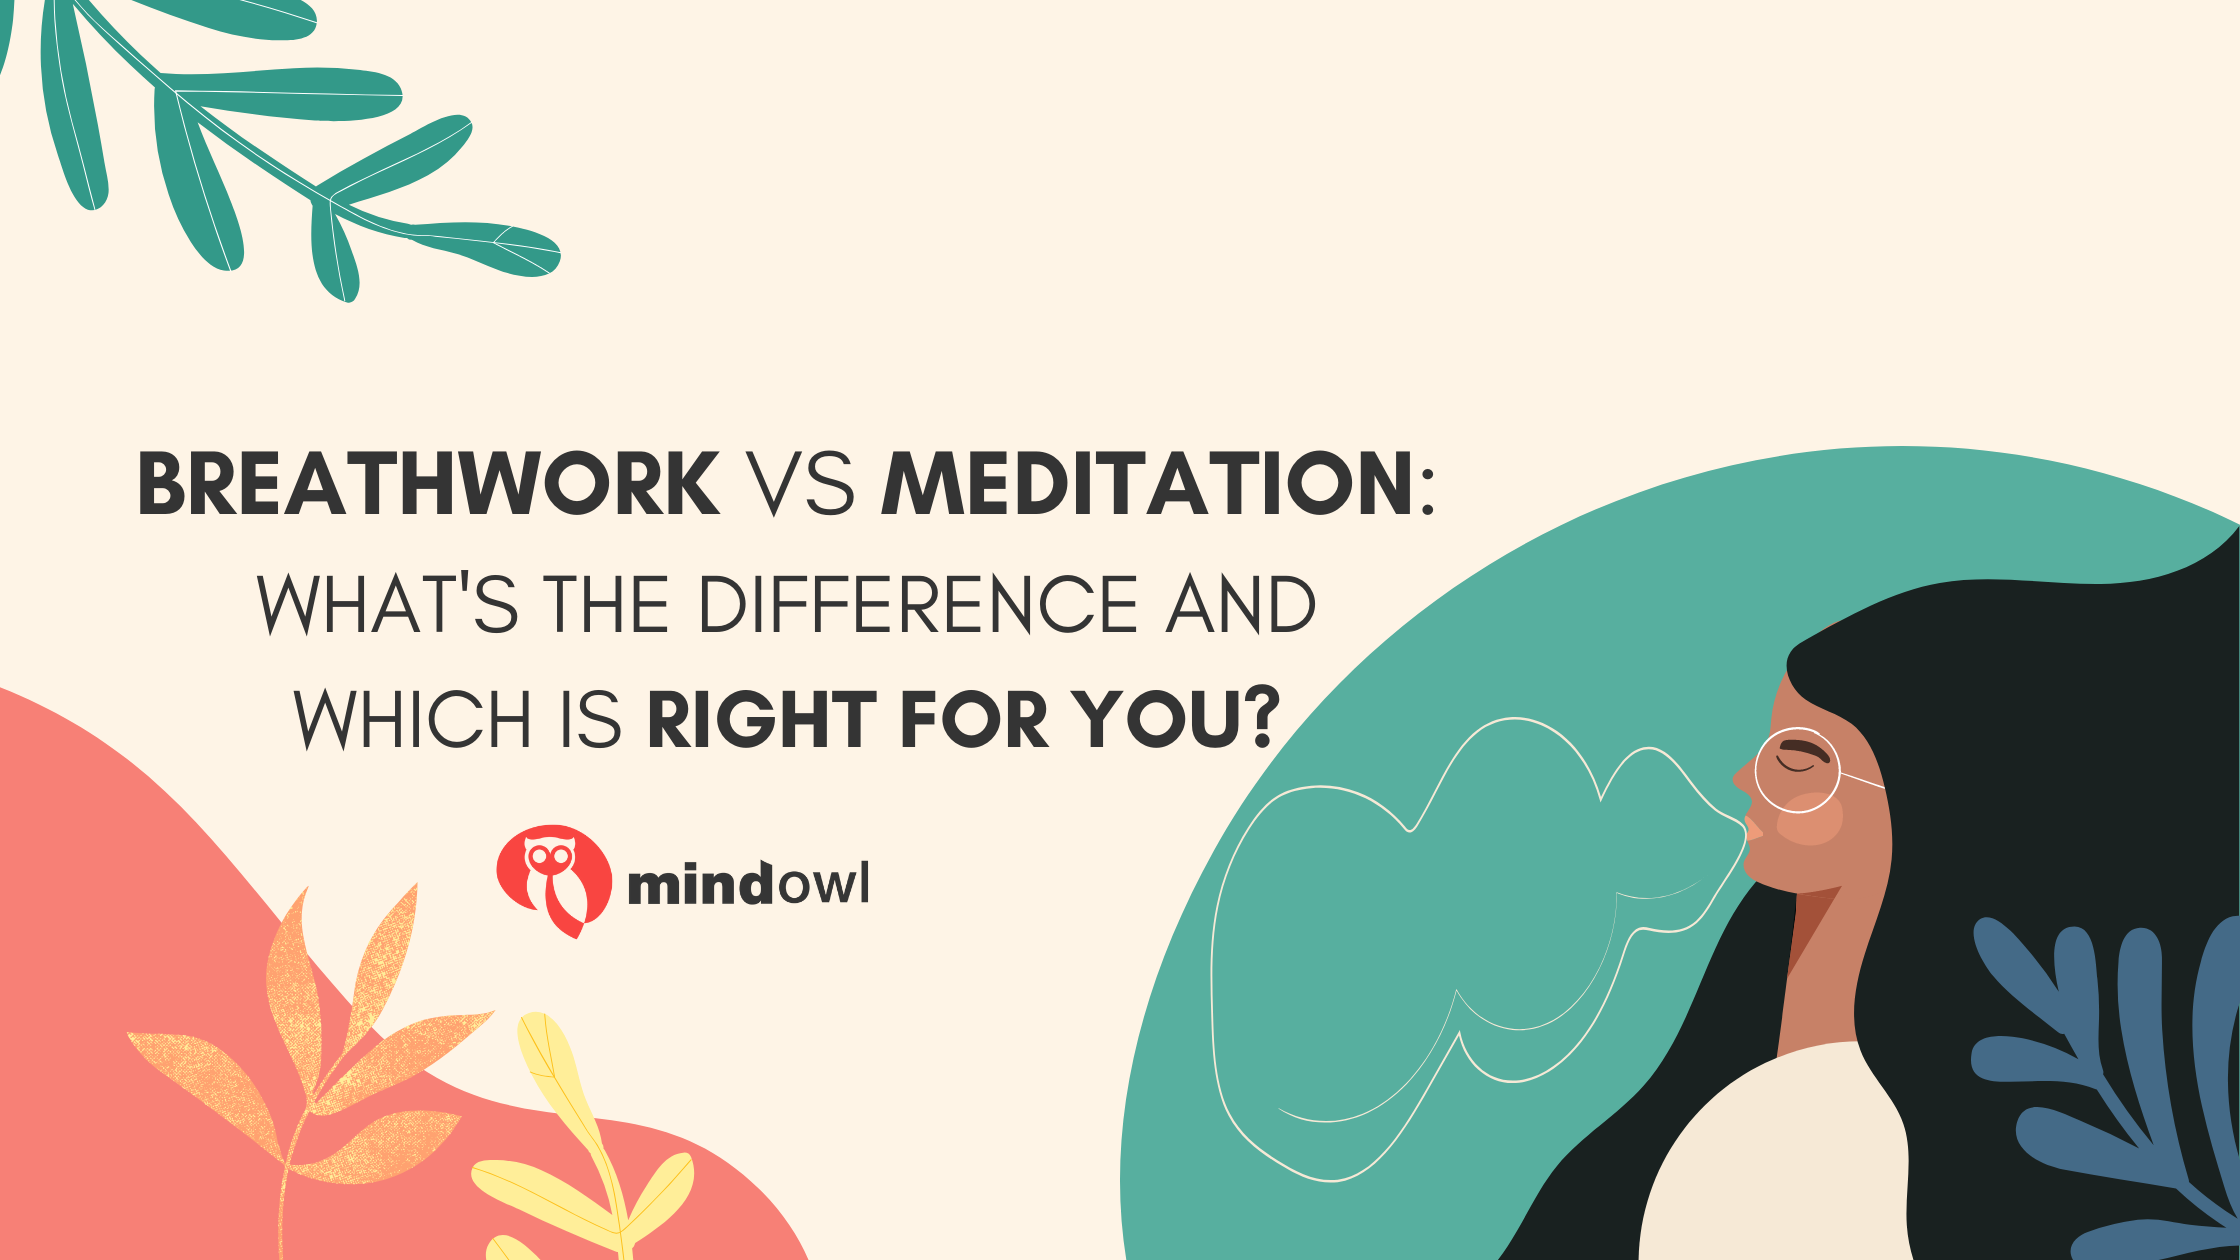 Breathwork vs Meditation: what’s the difference and which is right for you?